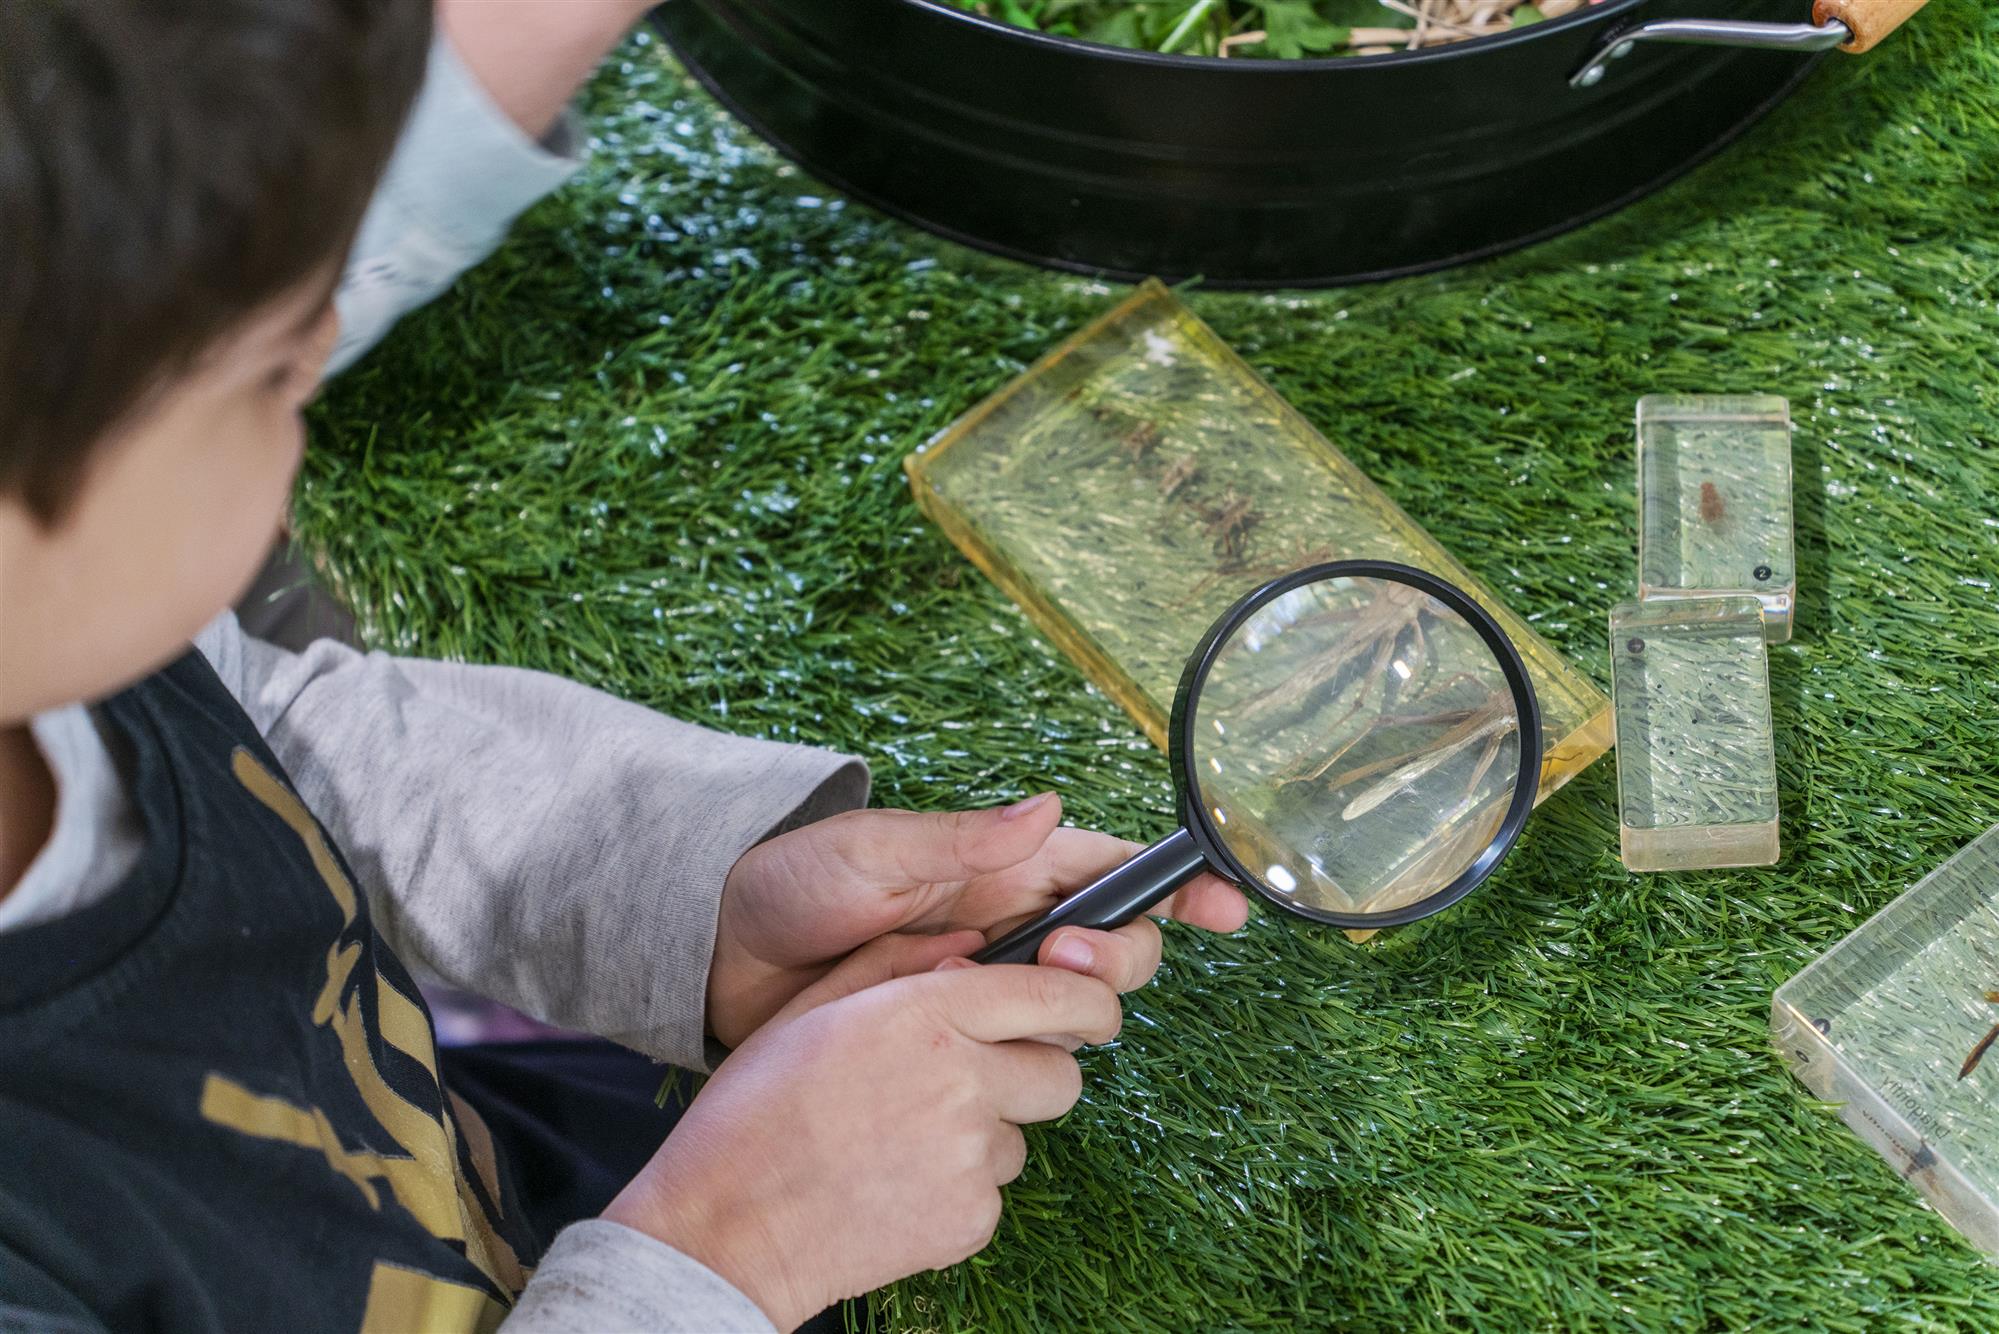 Boy looking at insects magnifying glass